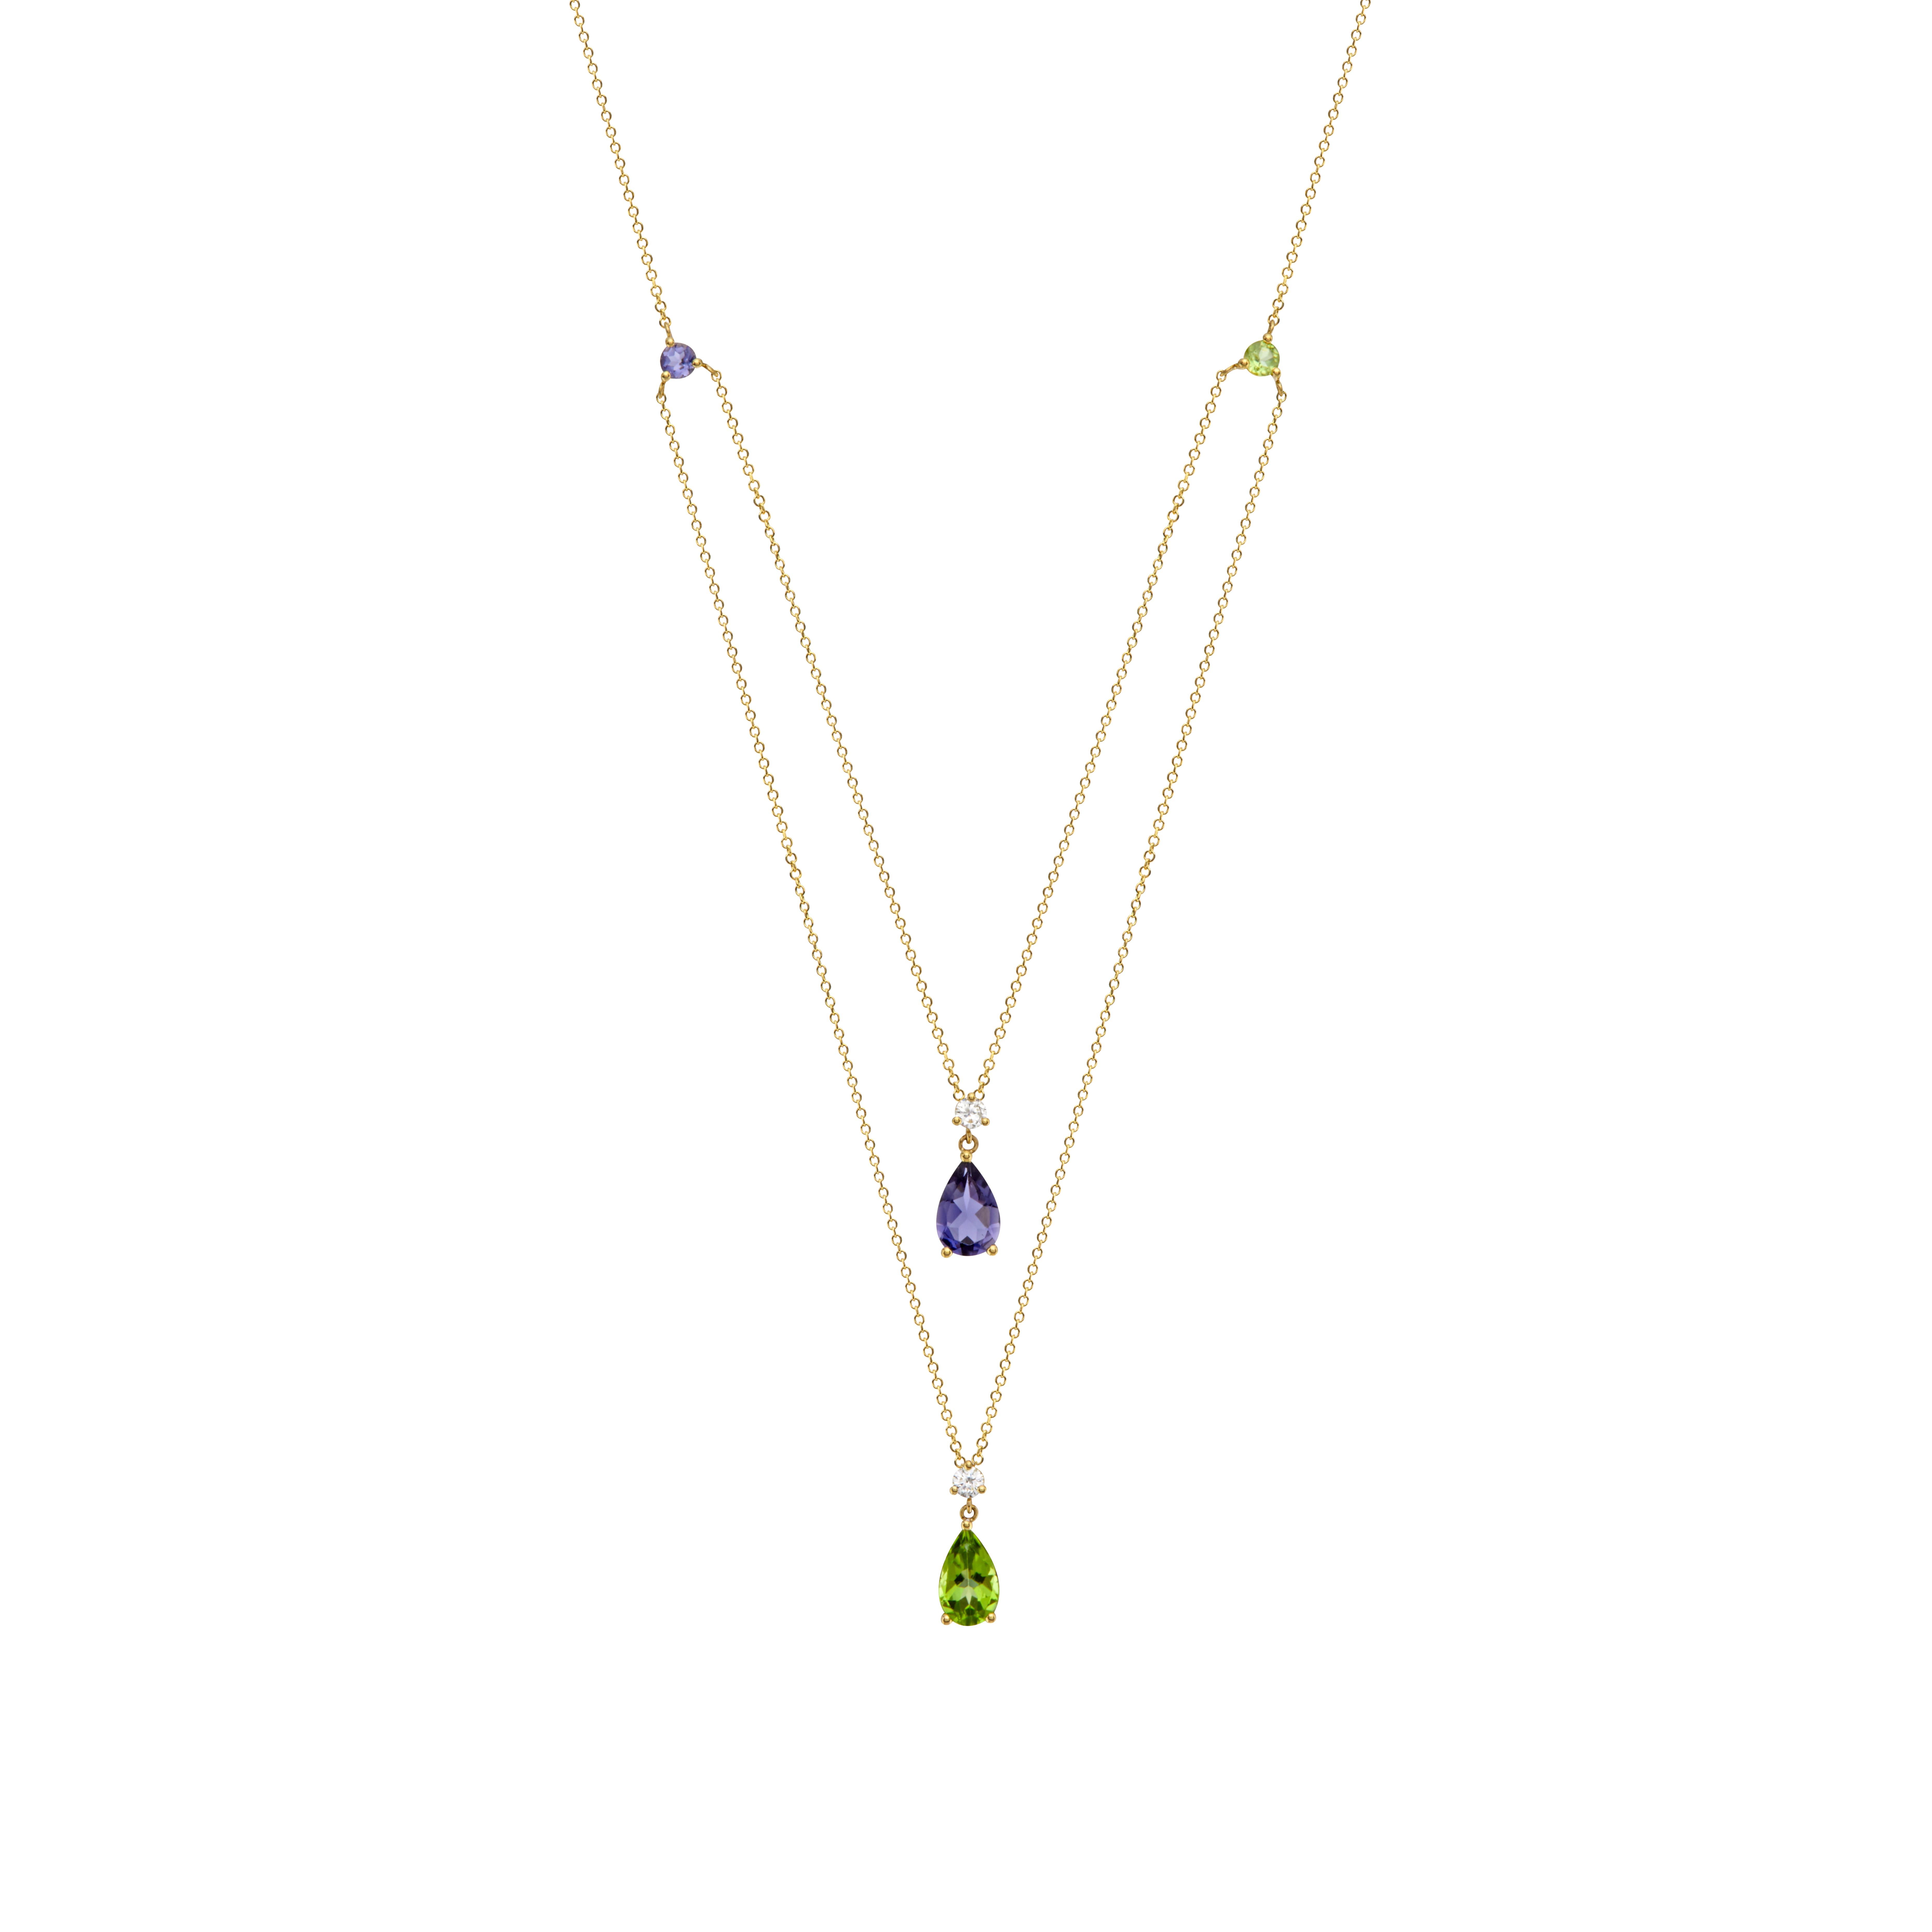 Contemporary Double Pendant Necklace in 18Kt Yellow Gold with Peridot Iolite and Diamonds For Sale